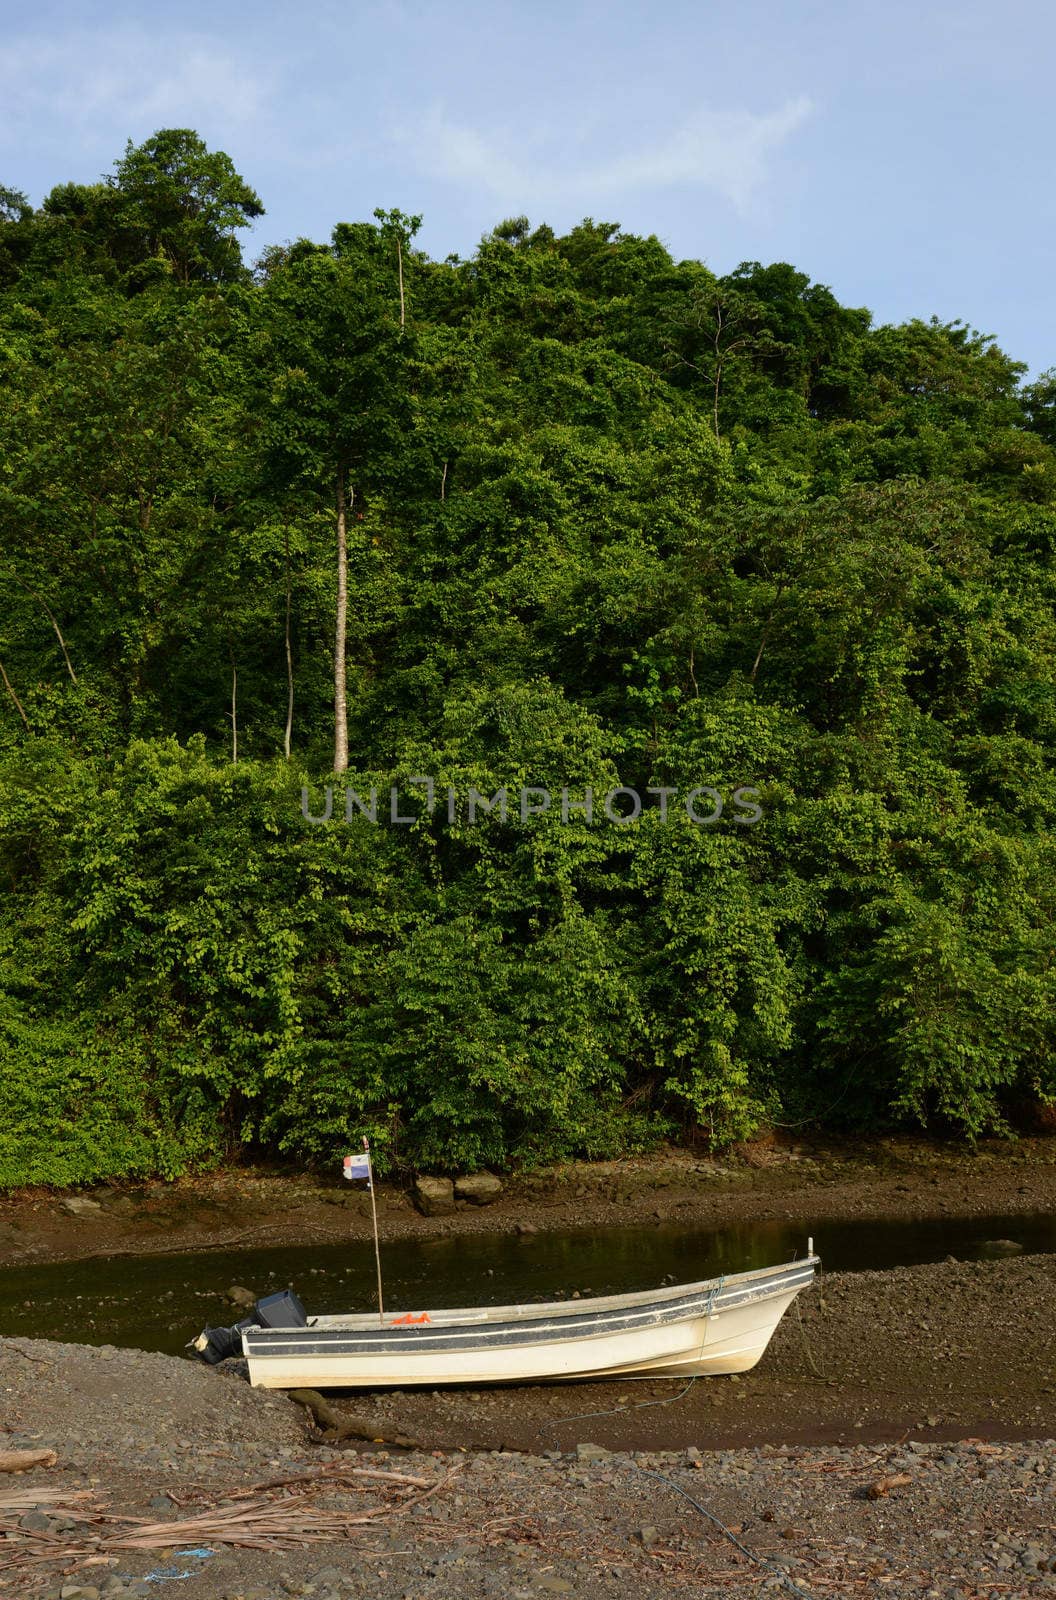 boat in ocean with lush tropical foliage by ftlaudgirl